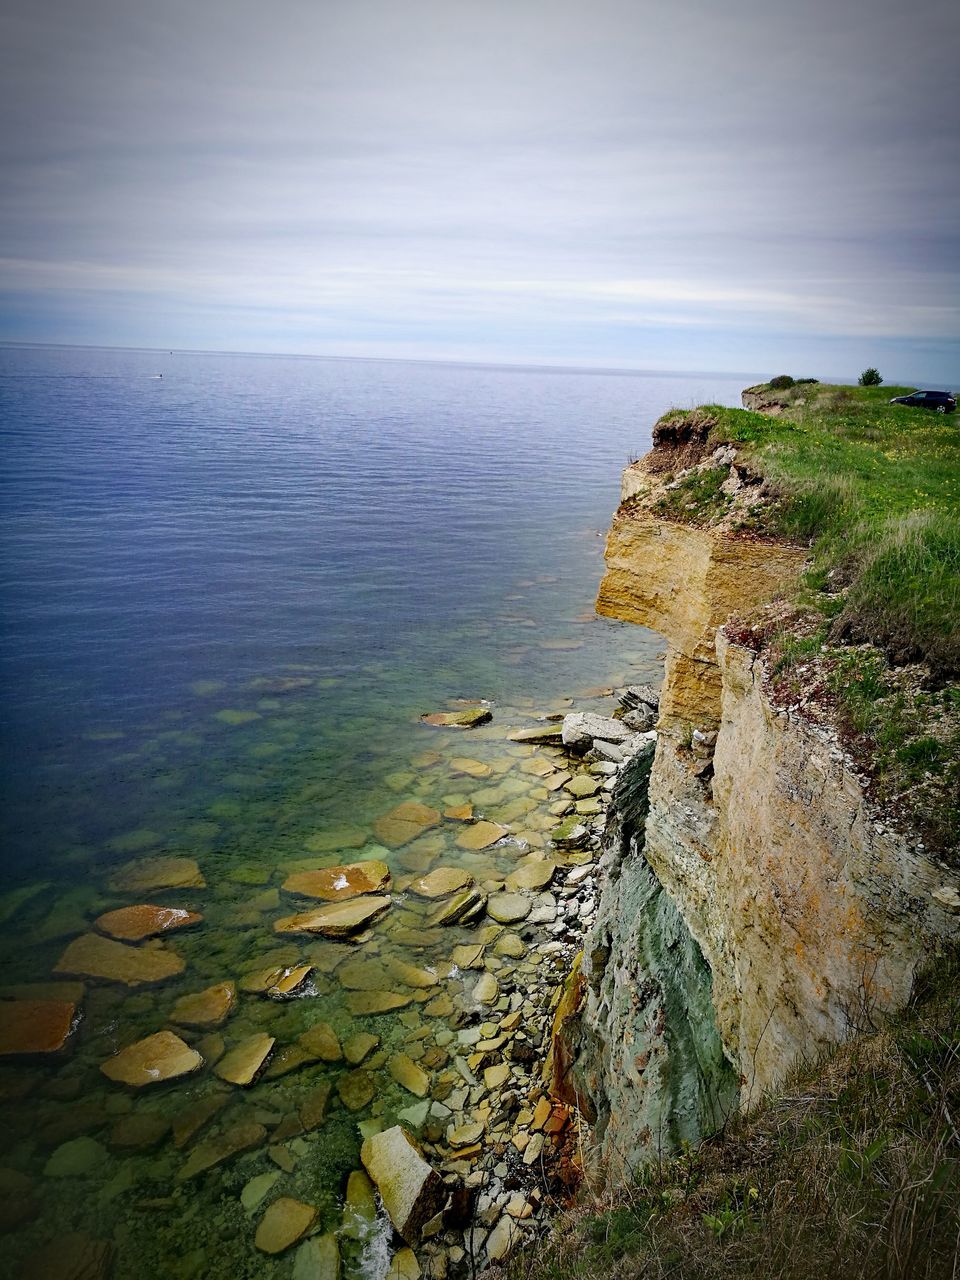 sea, water, horizon over water, nature, scenics, tranquility, tranquil scene, rock - object, beauty in nature, outdoors, no people, day, sky, cliff